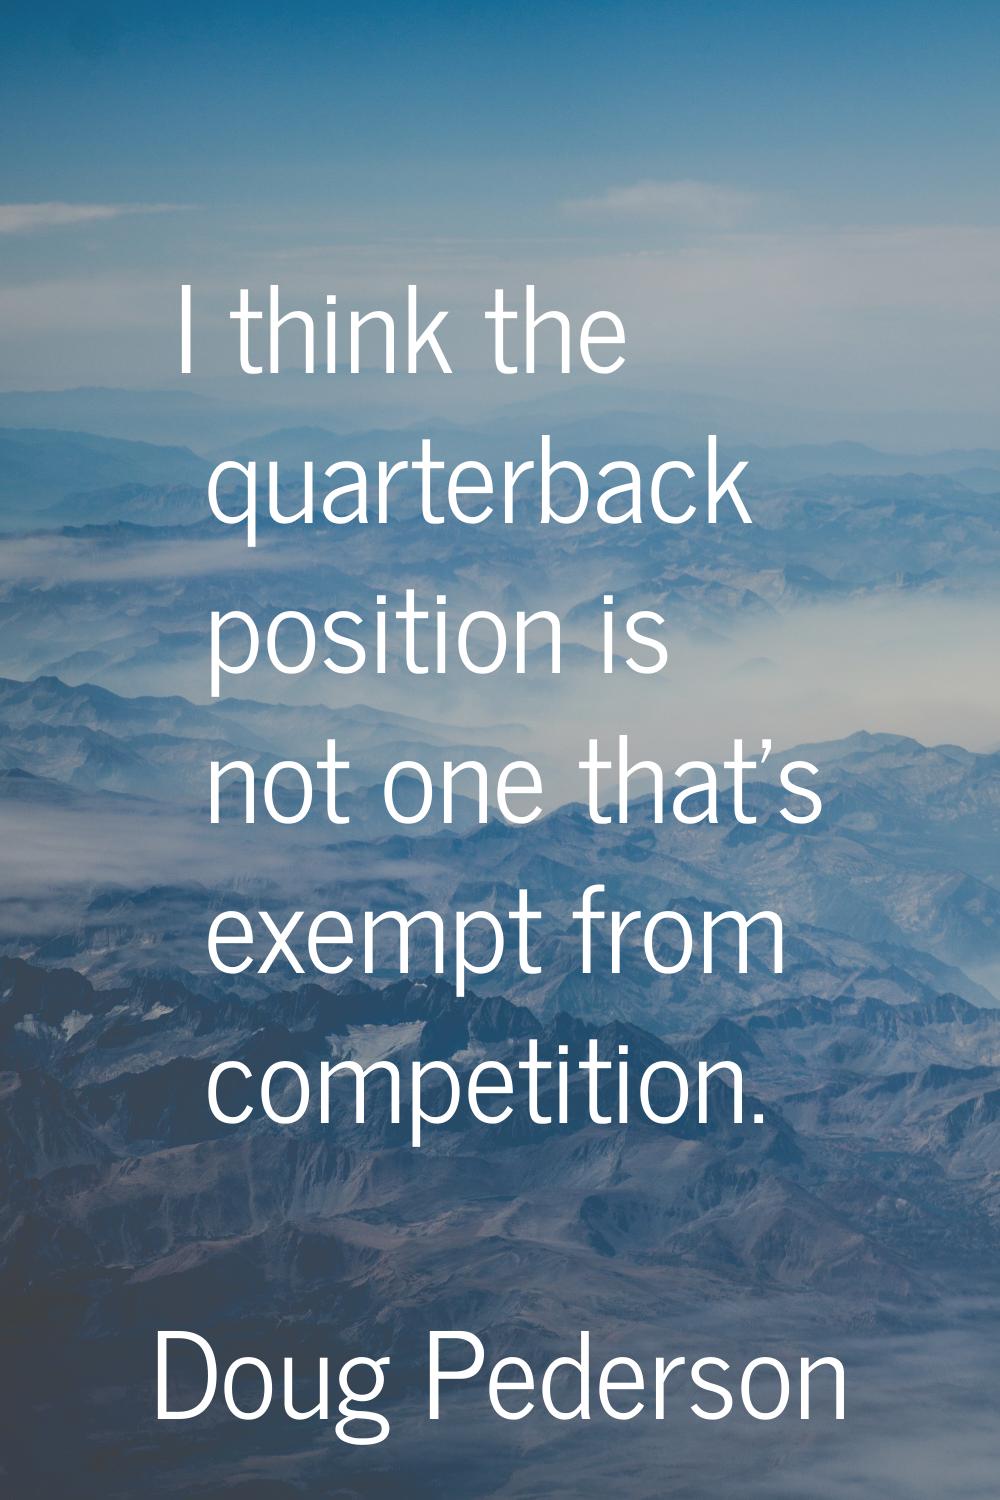 I think the quarterback position is not one that's exempt from competition.